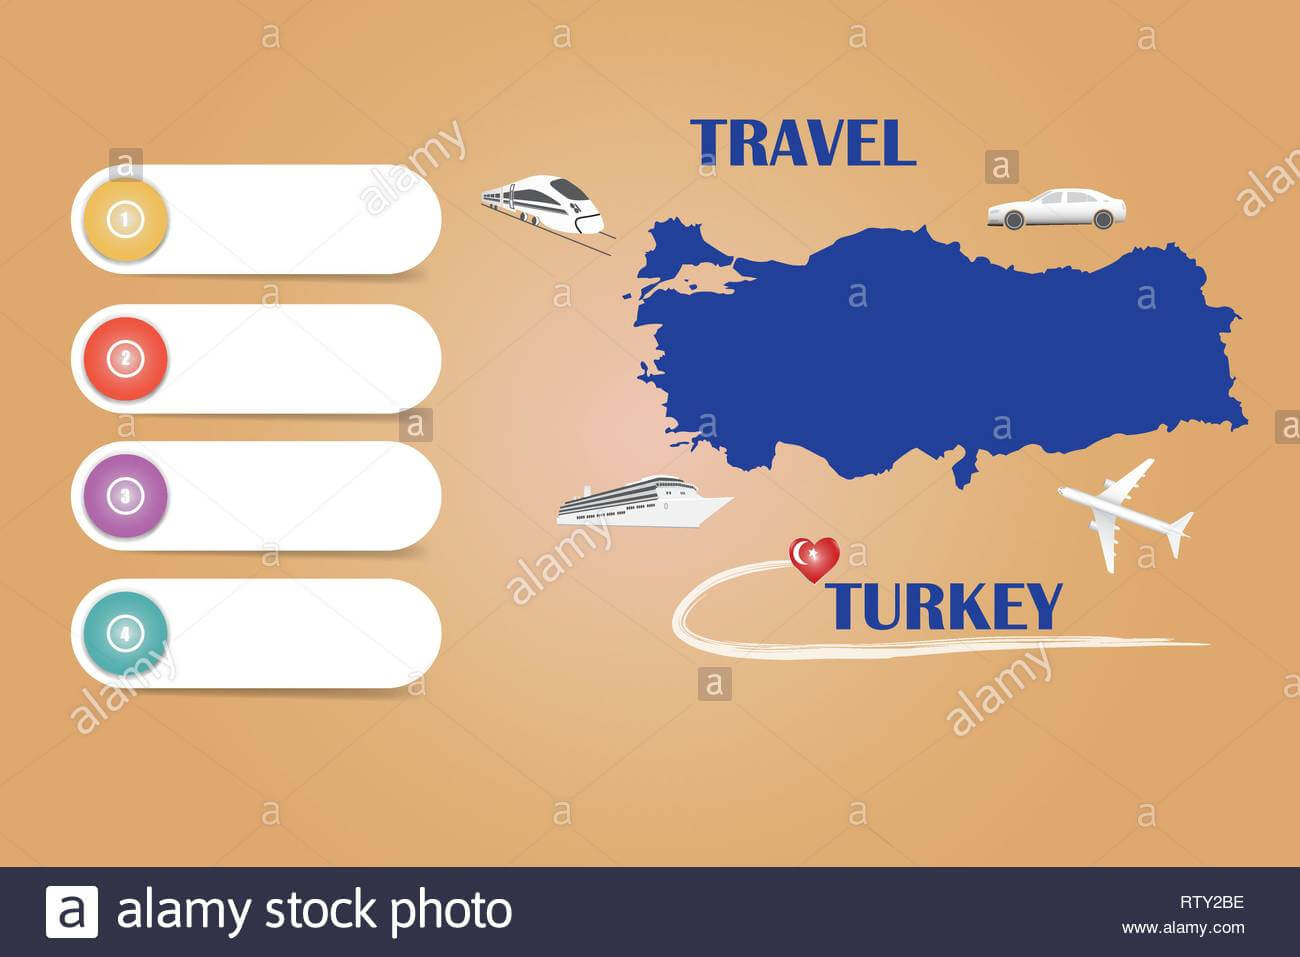 Travel Turkey Template Vector For Travel Agencies Etc Pertaining To Blank Turkey Template